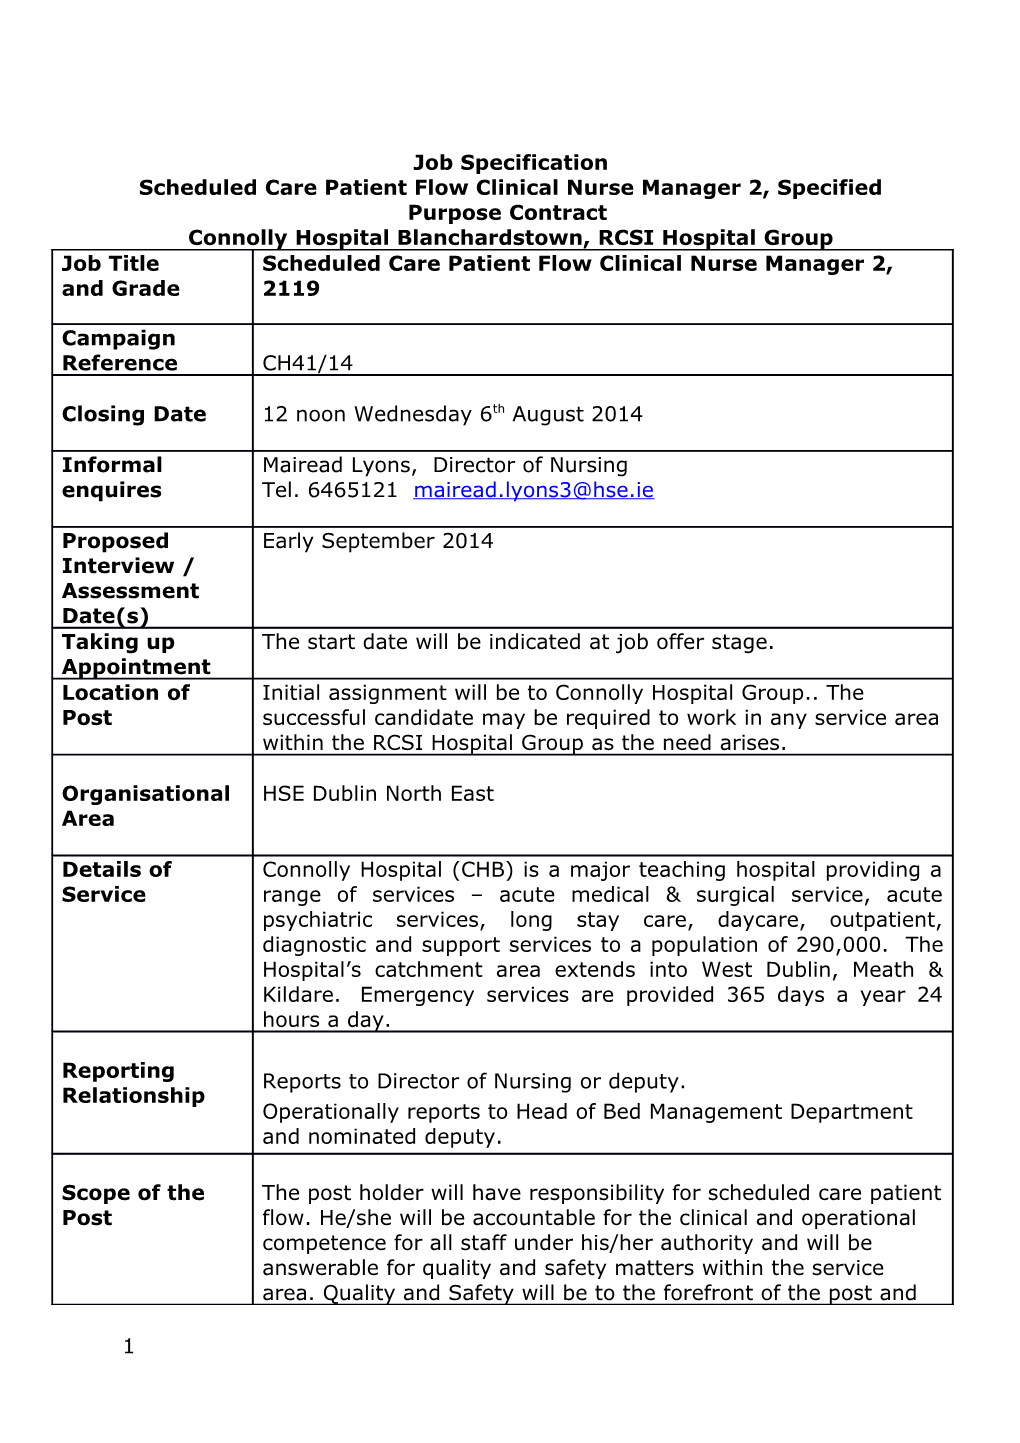 Scheduled Care Patient Flow Clinical Nurse Manager 2, Specified Purpose Contract